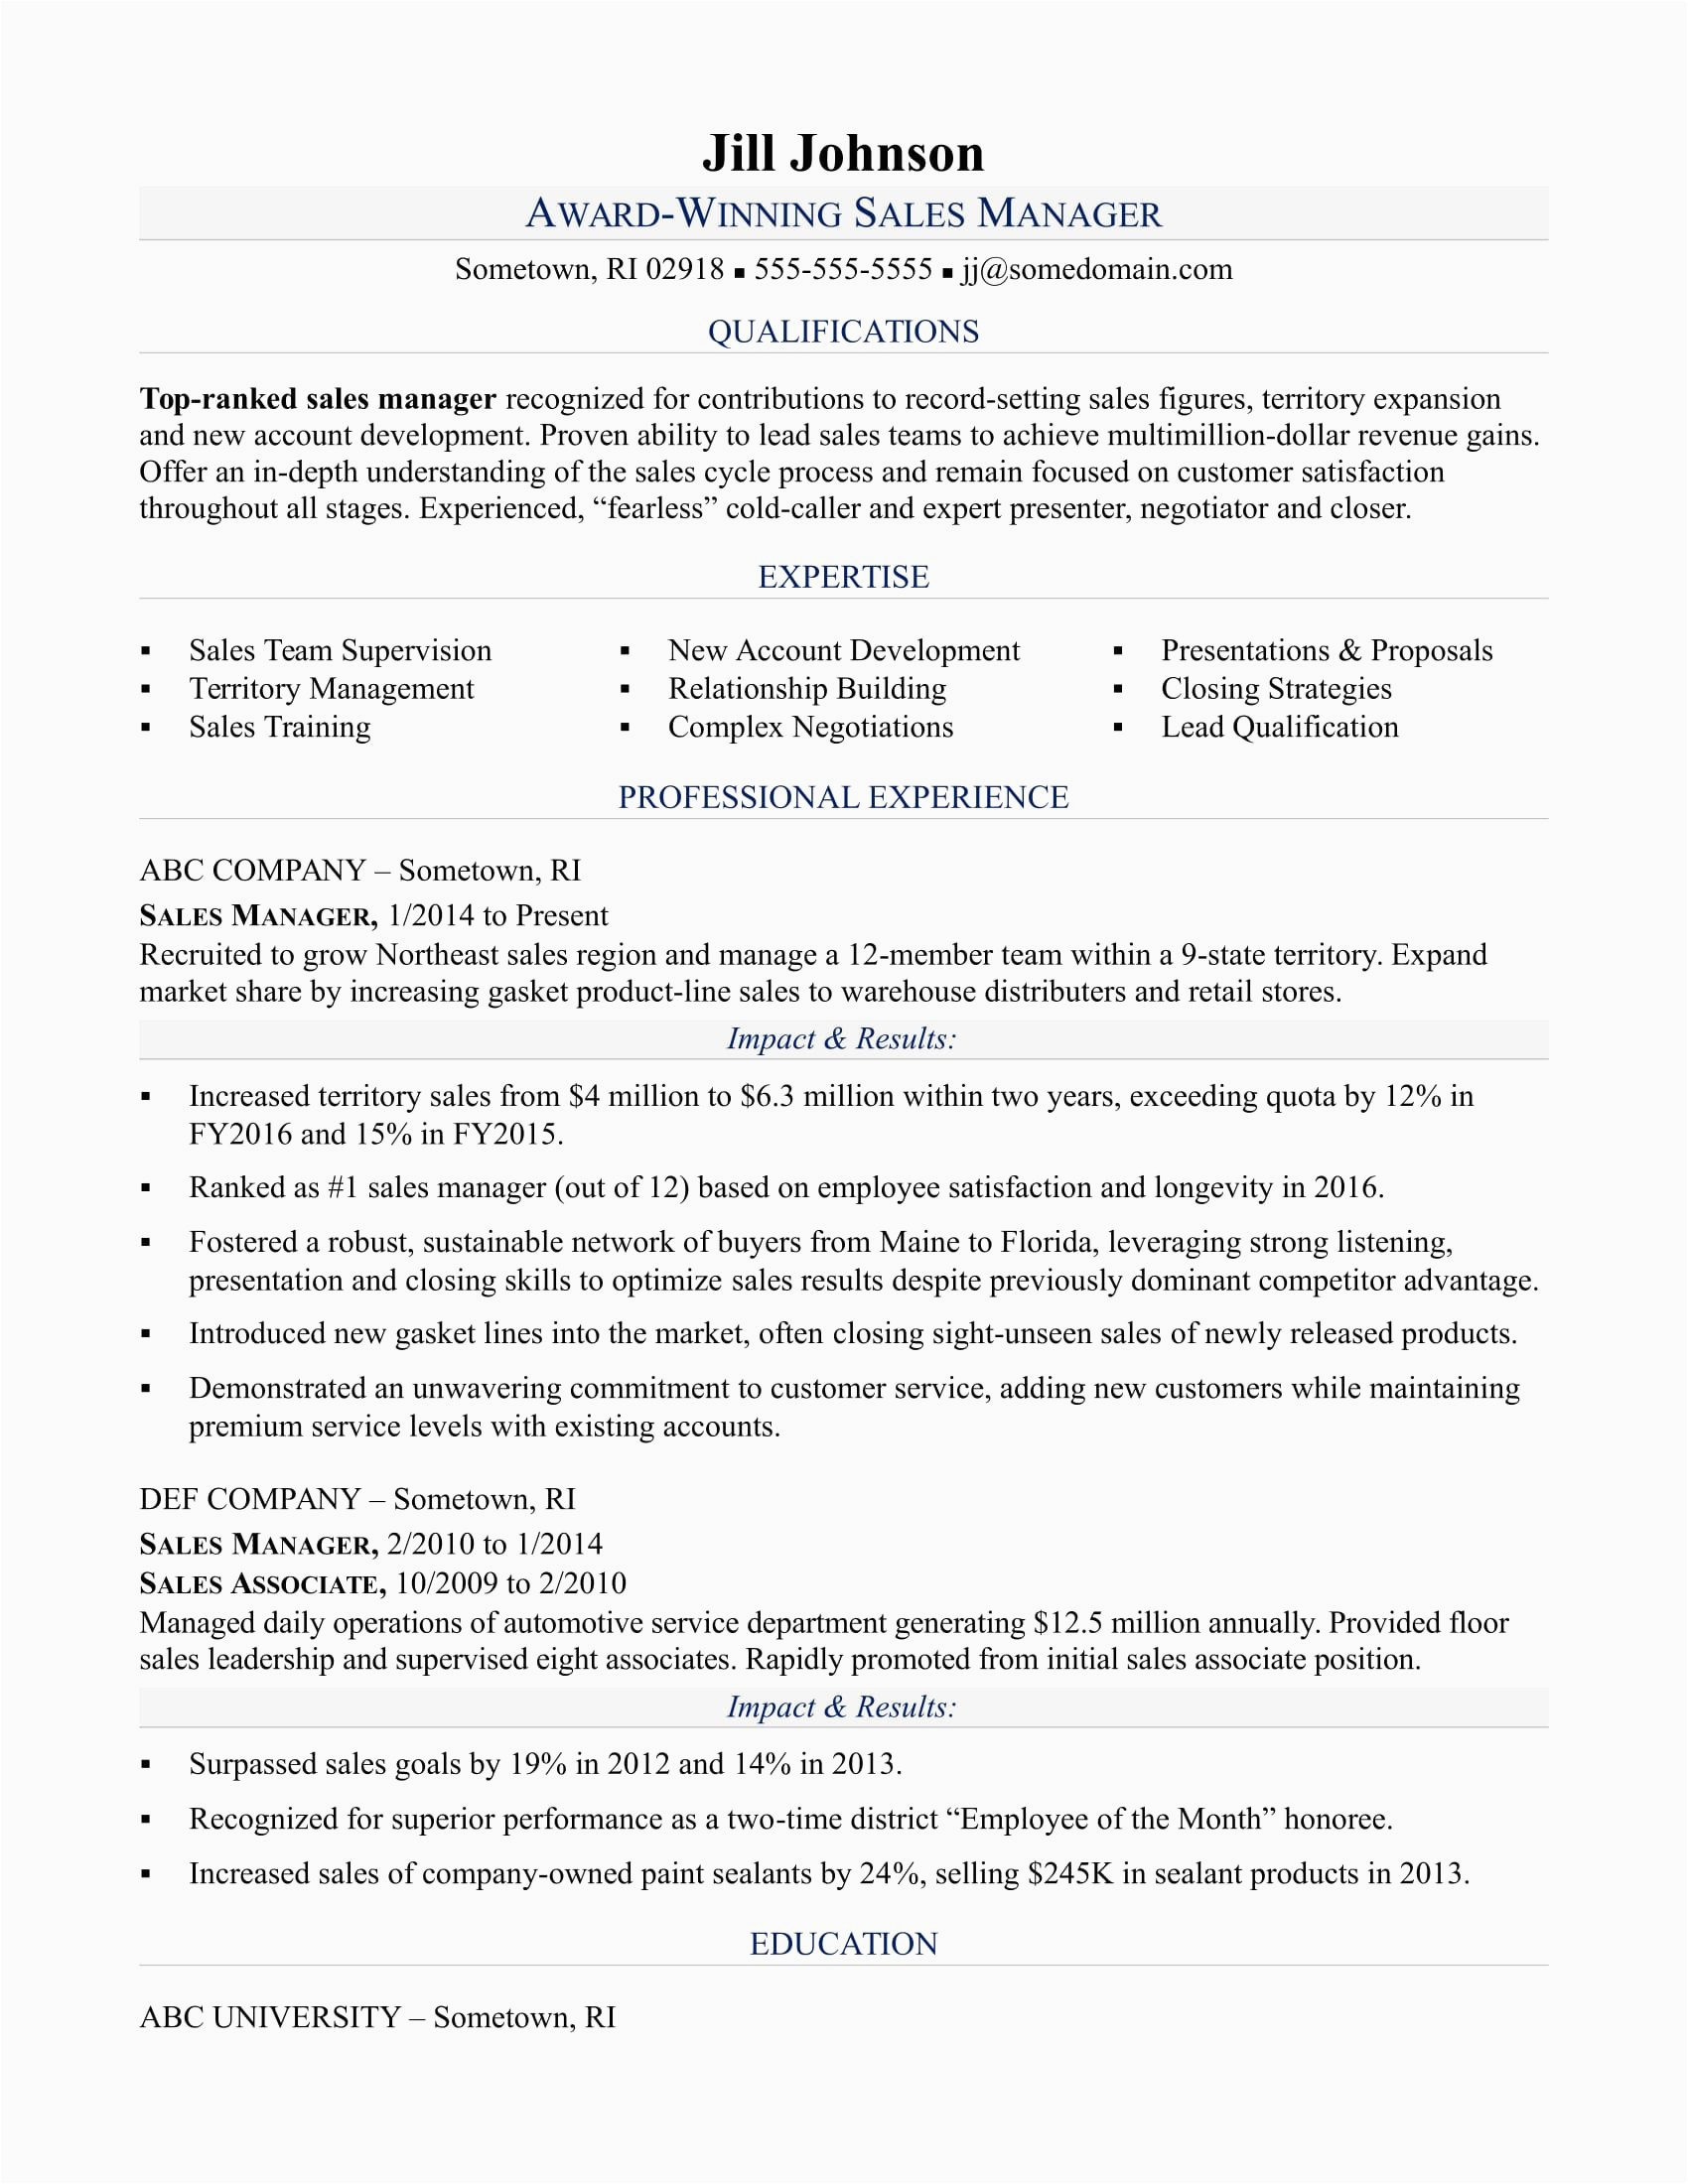 Sample Resume for Job within Same Company √ 20 Resume for Promotion within Same Pany ™